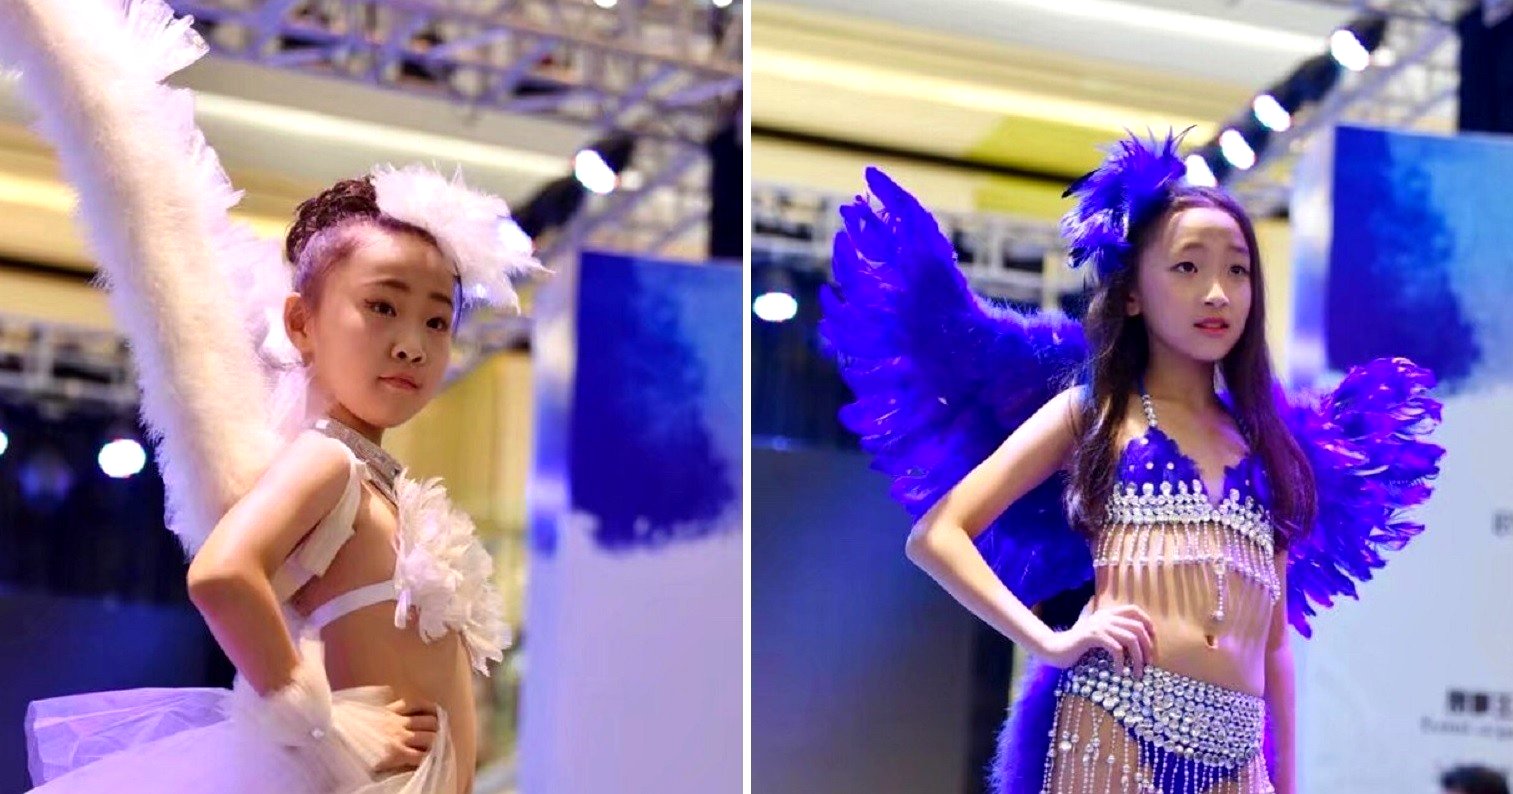 Little Girls Used in Victoria Secret-Style Fashion in China Sparks Outrage